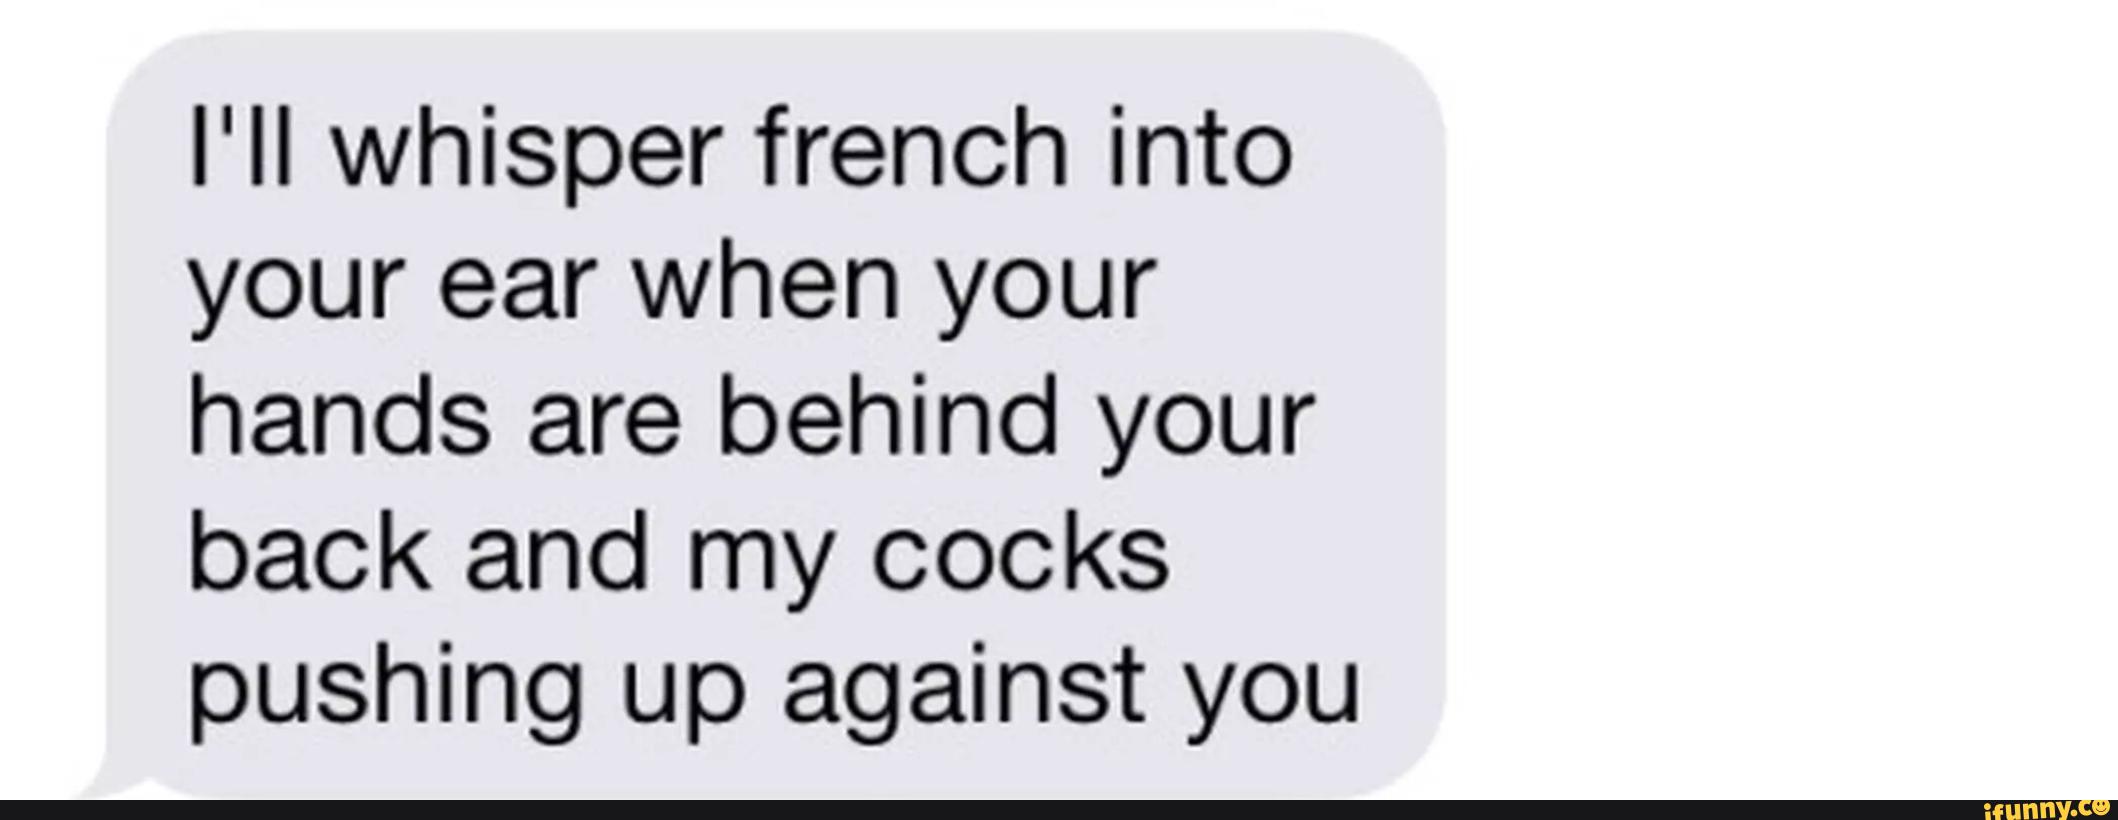 100+ Examples Of Dirty Messages That Will Make You Blush